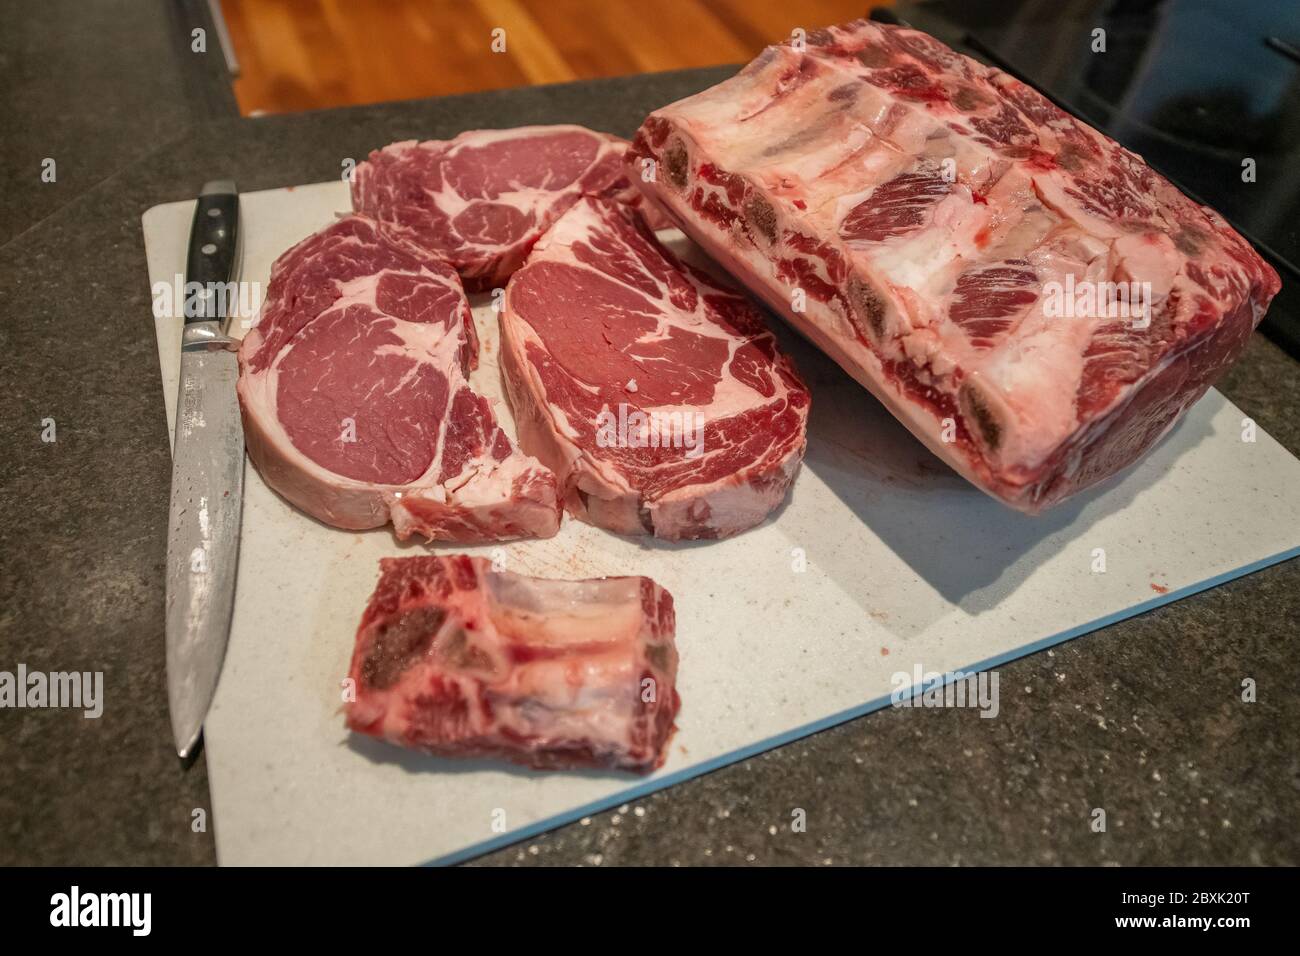 Raw beef prime rib roasts and steaks with thick pieces of meat, the marbling of fat and rib bones. The meat is sitting on a white cutting board. Stock Photo